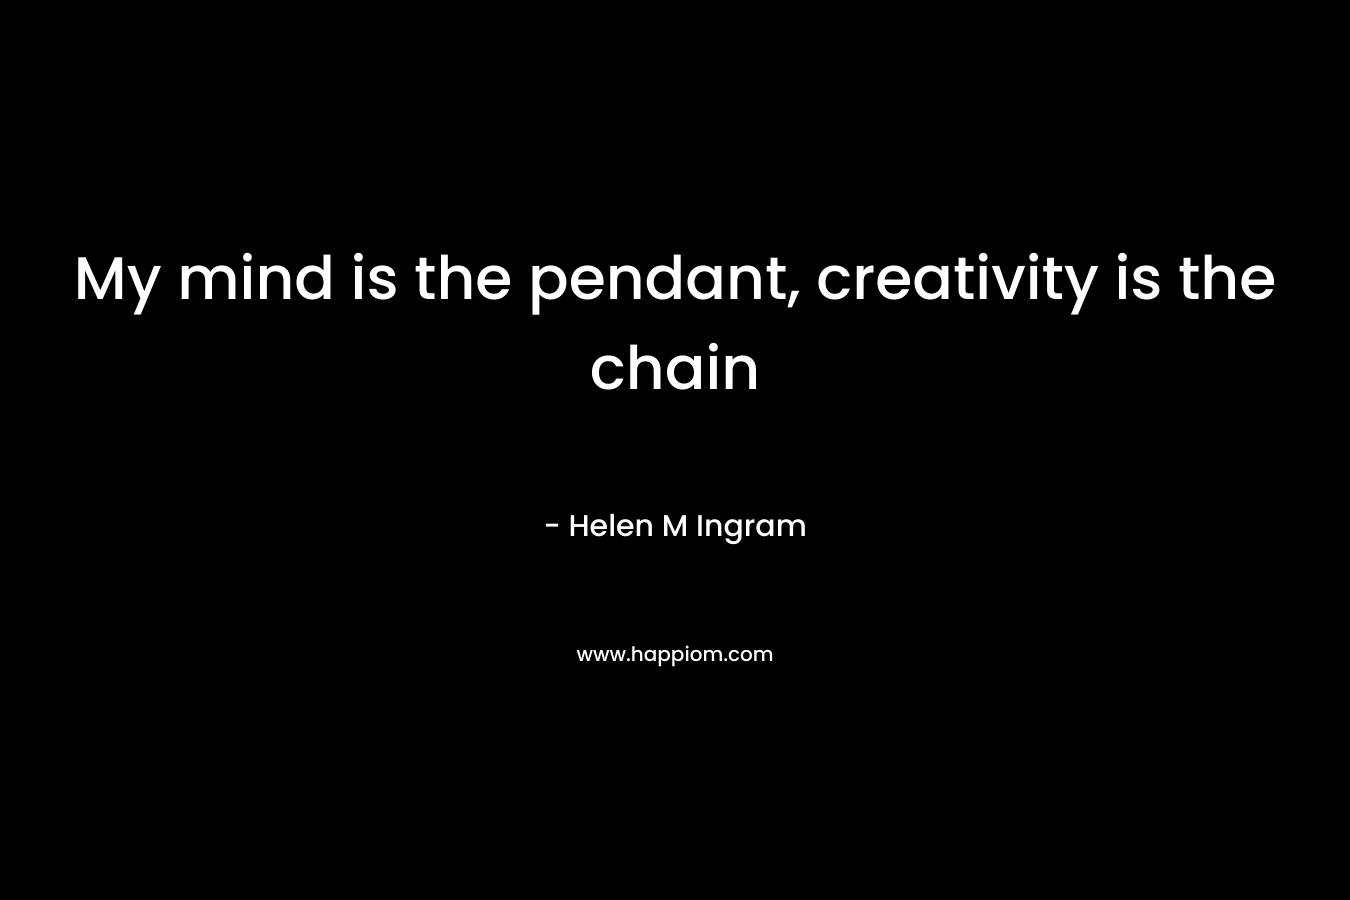 My mind is the pendant, creativity is the chain